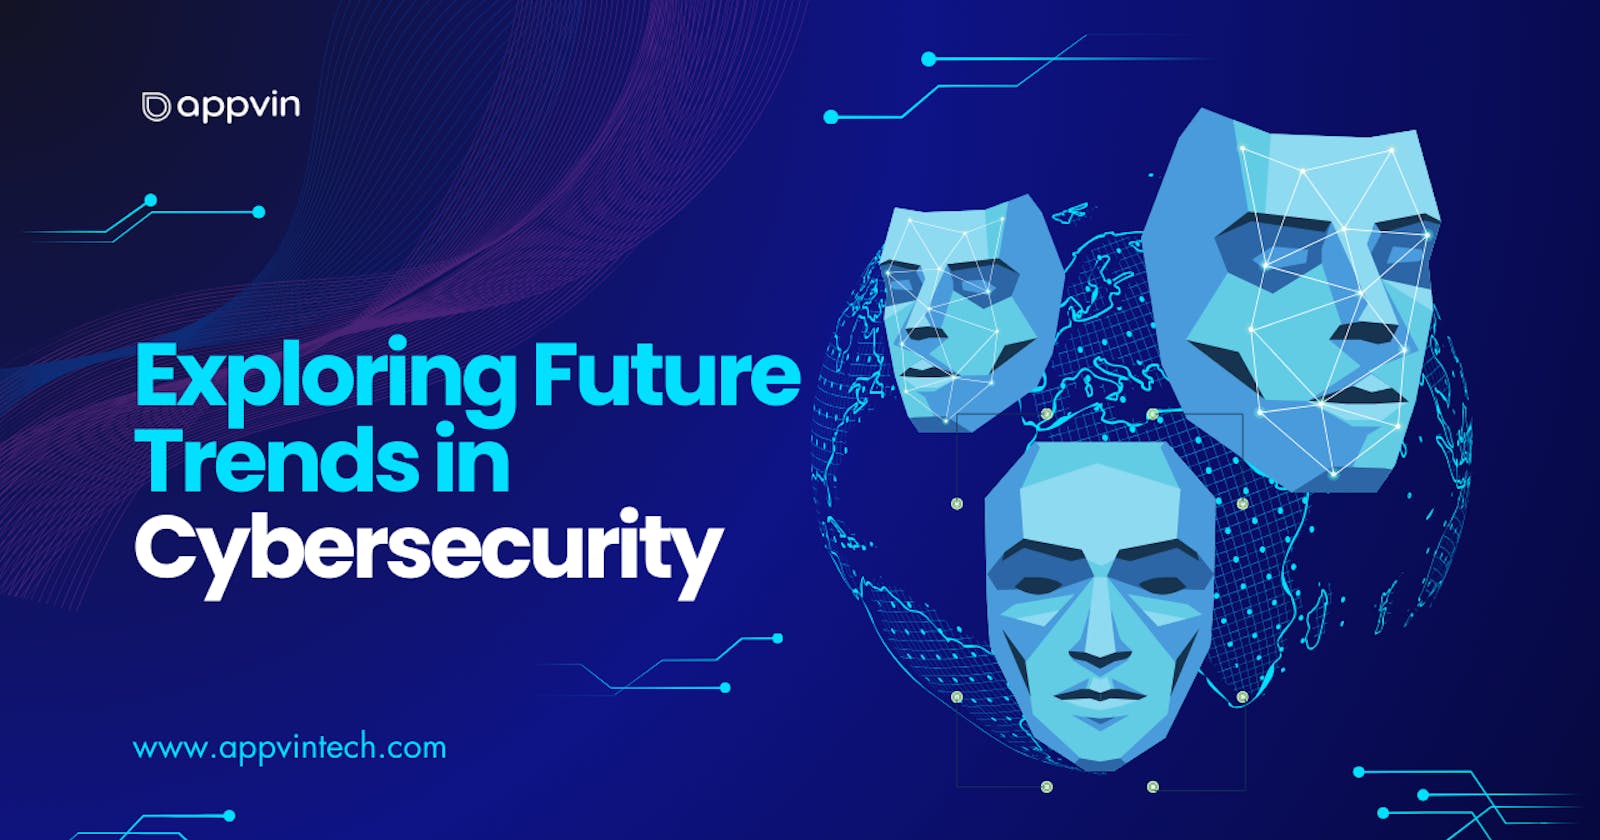 Discover the latest trends that are shaping the future of cybersecurity